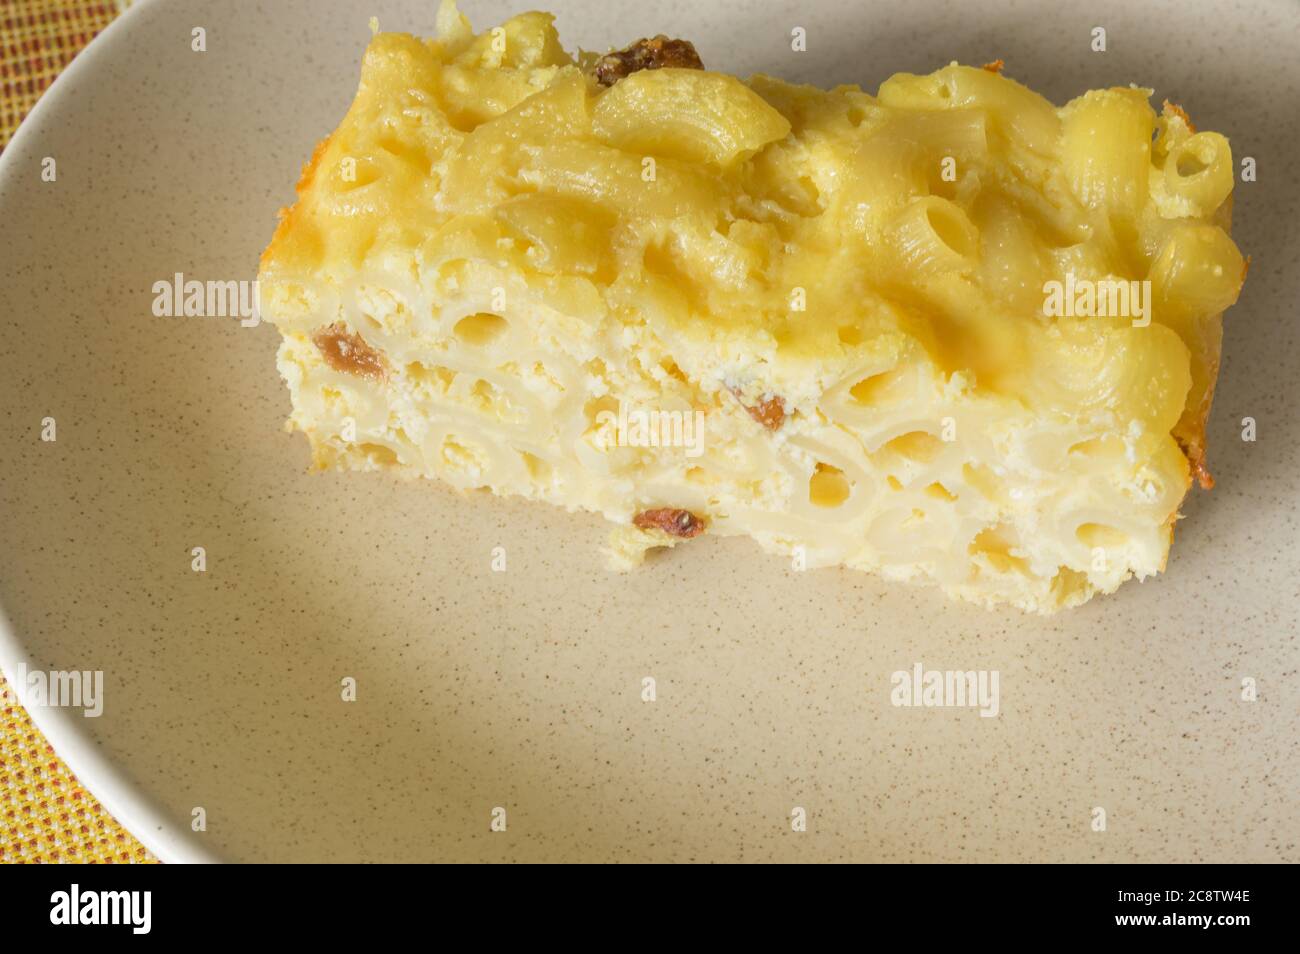 Close view on piece of handmade baked Macaroni Pudding made with Quark and Sultana Stockfoto